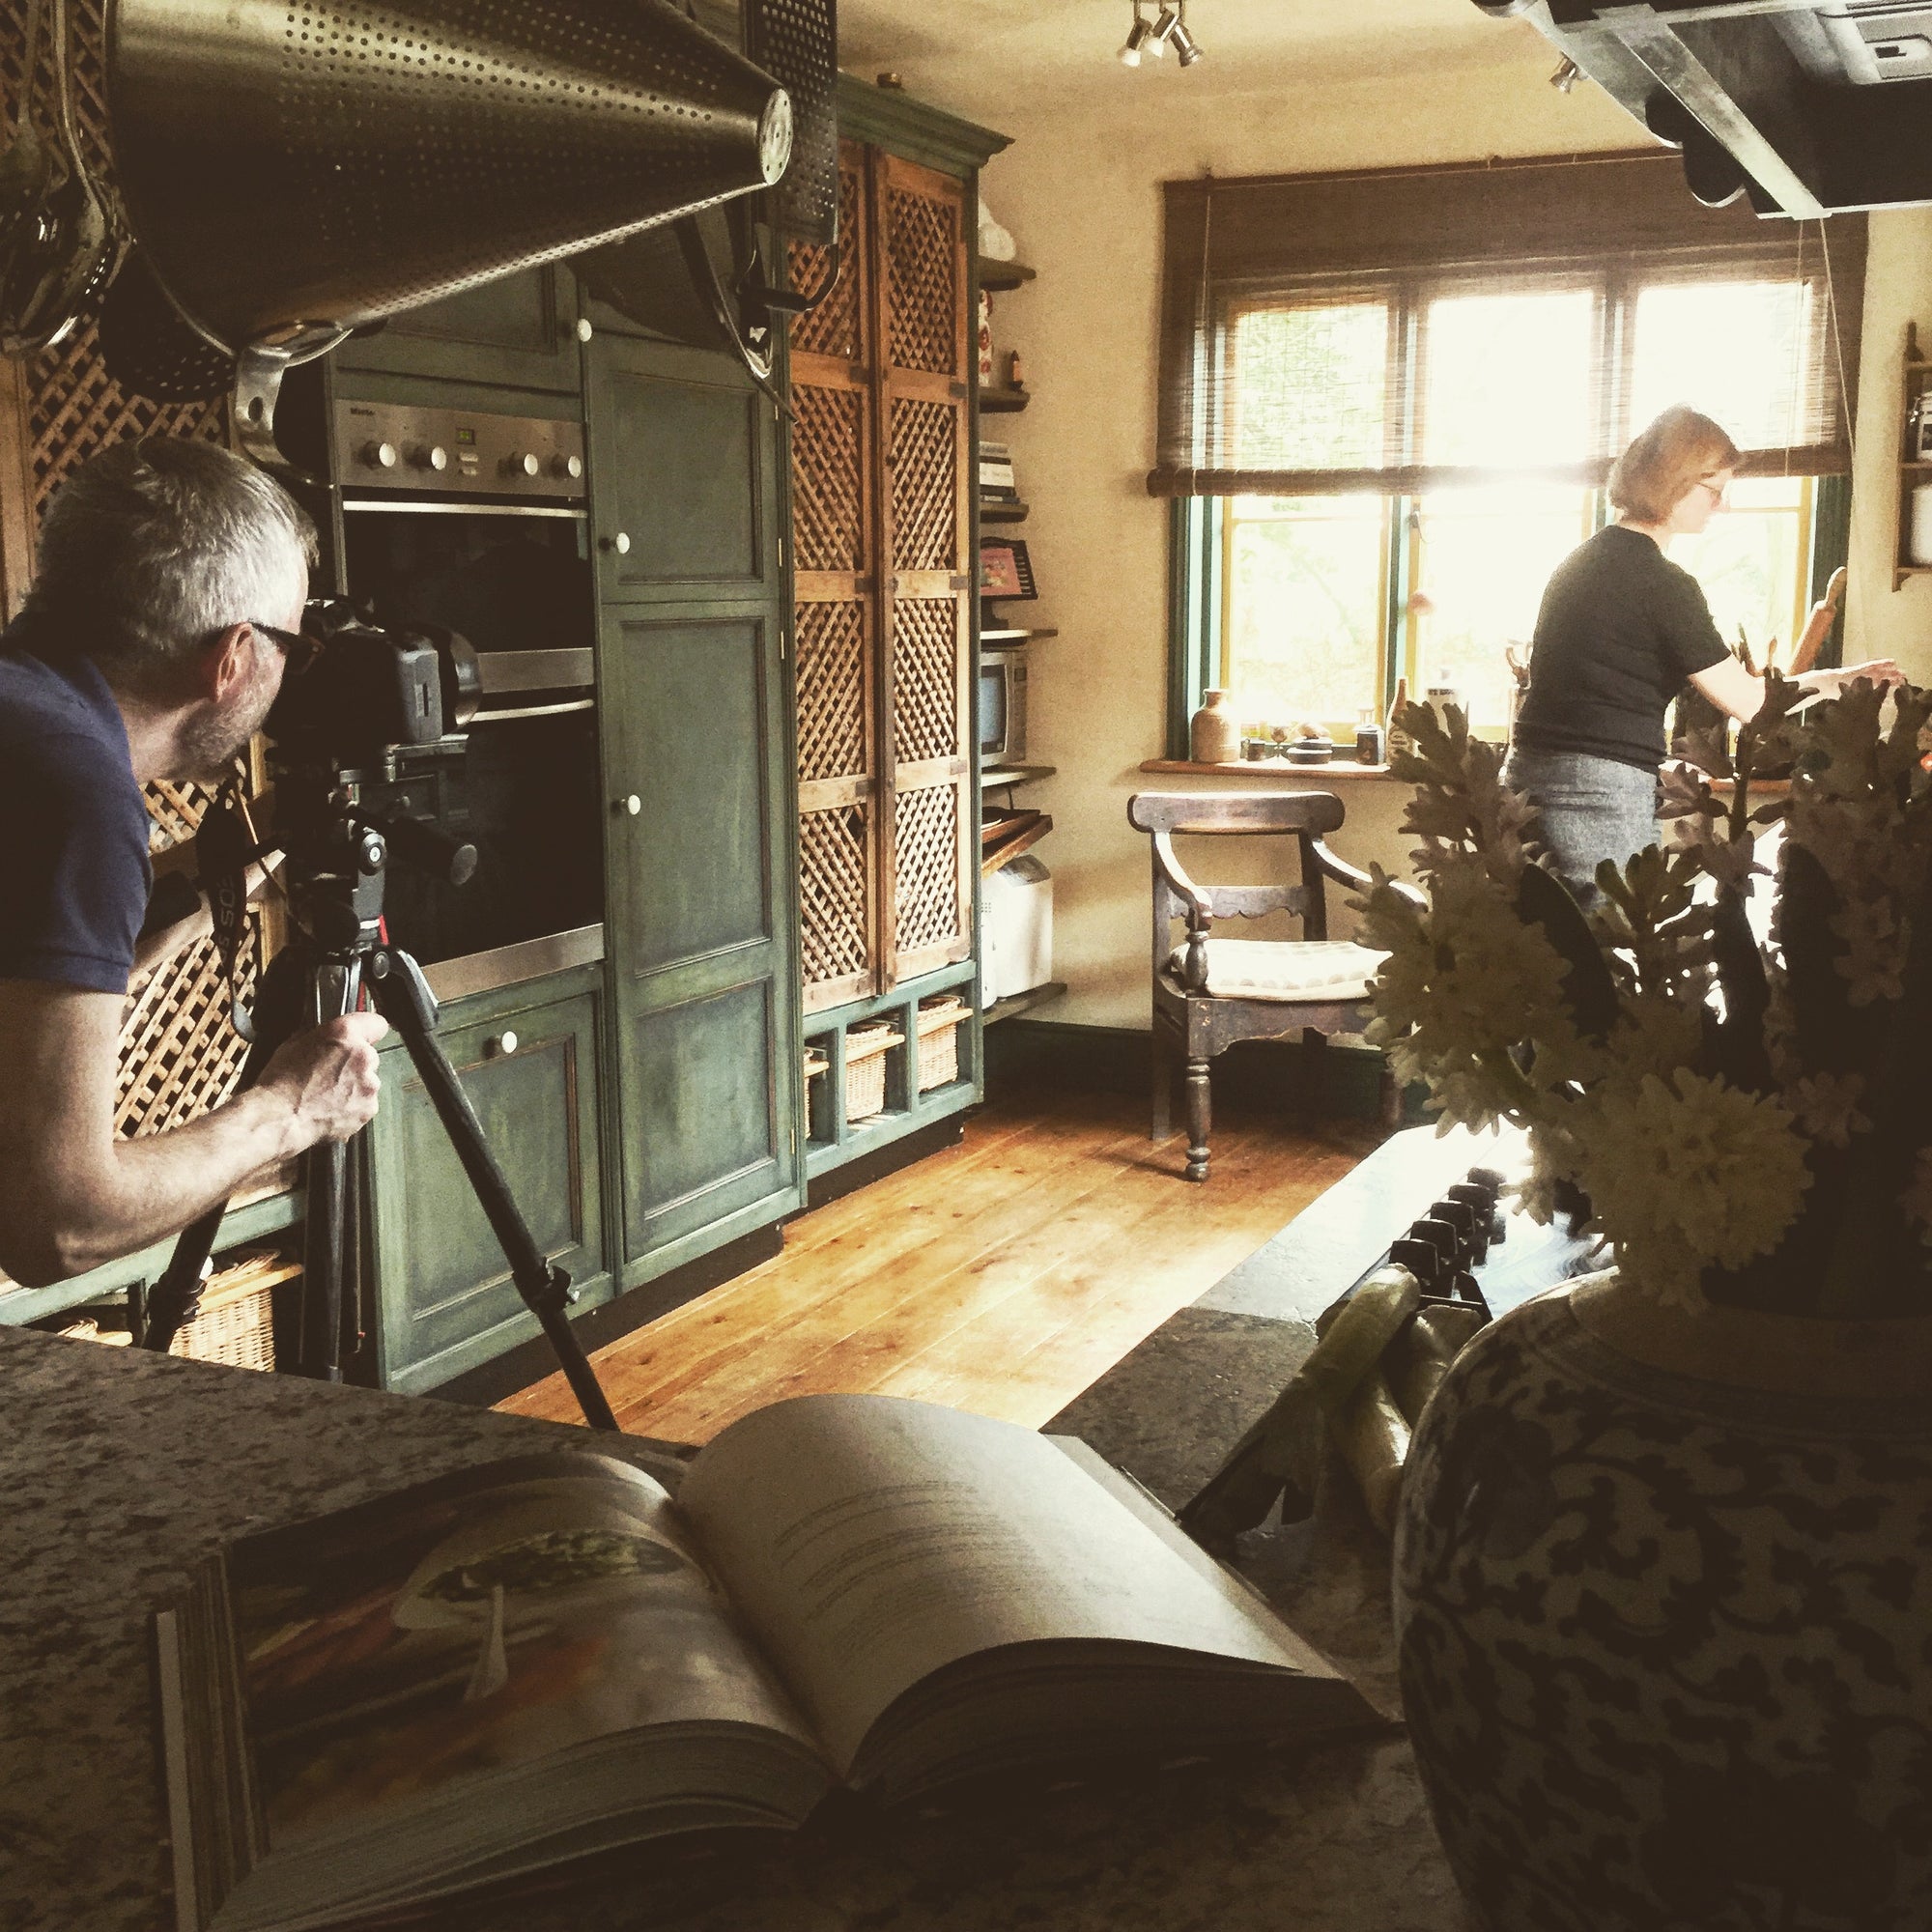 Homes and Antiques Magazine Shoot